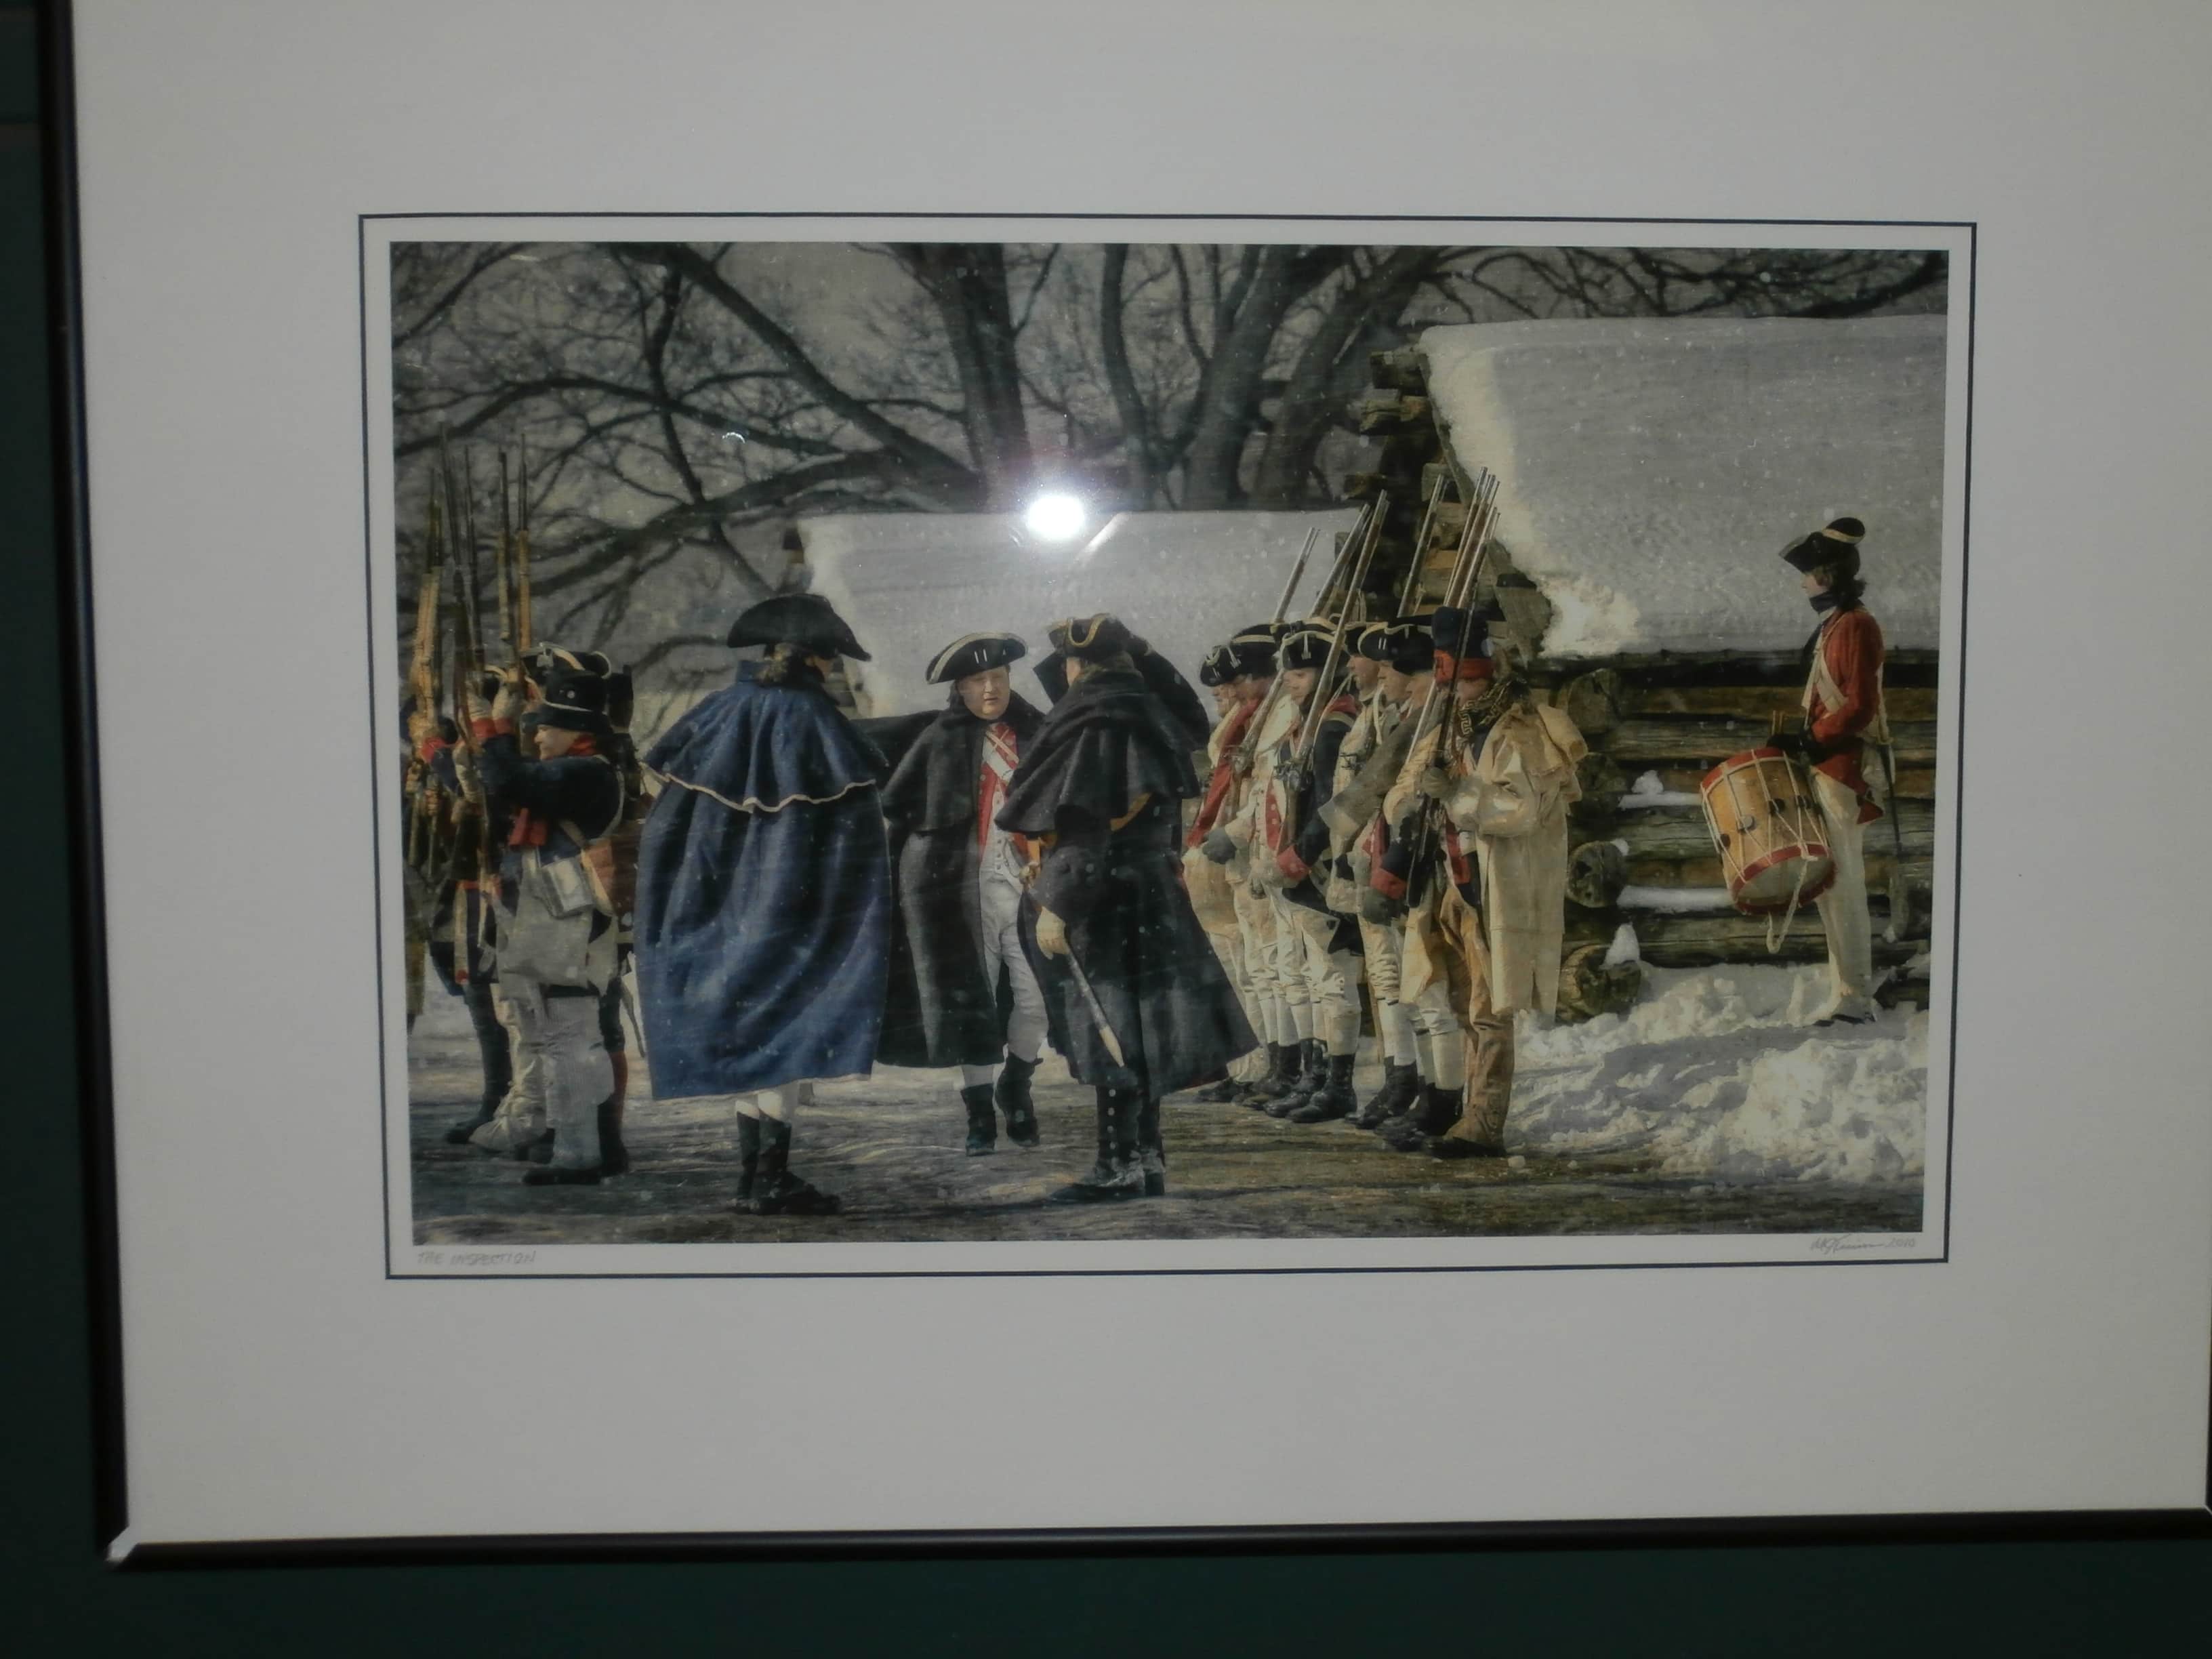 Washington reviewing his troops - Valley Forge, PA